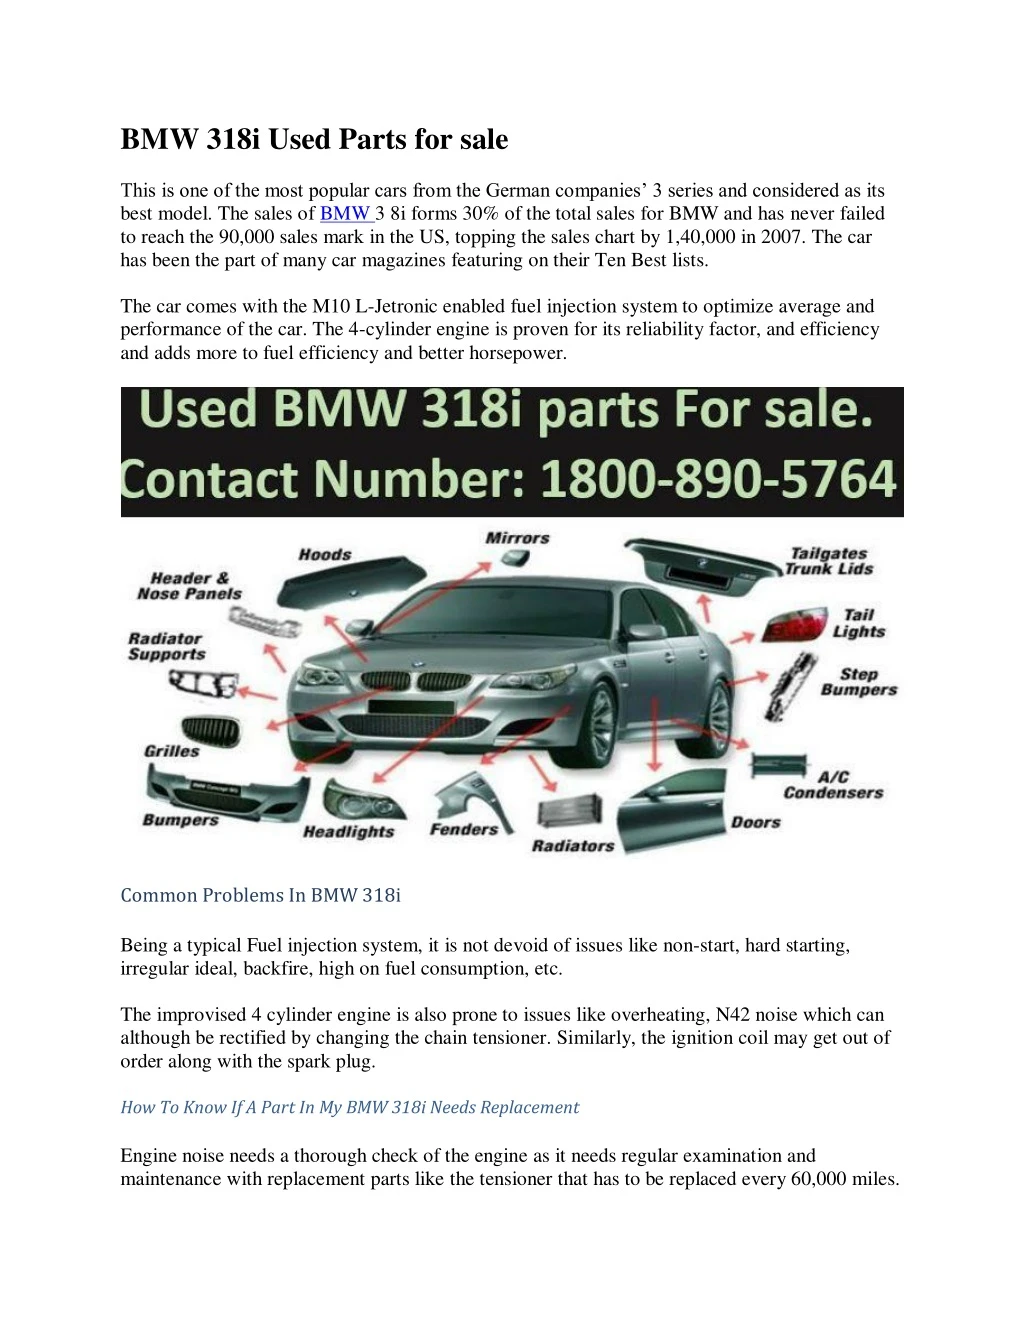 bmw 318i used parts for sale n.